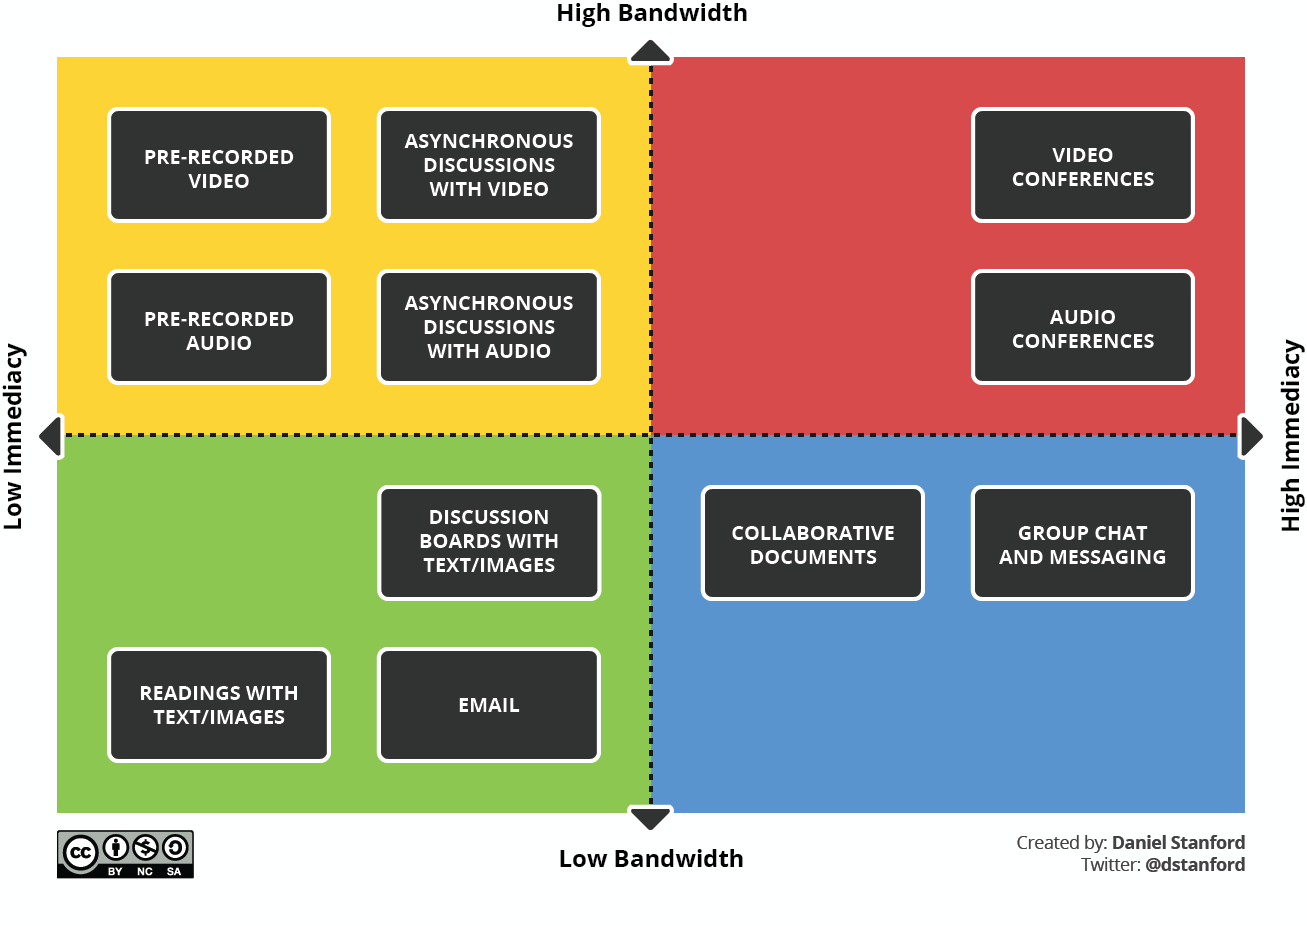 matrix of low/high bandwidth, low/high immediacy teaching practices